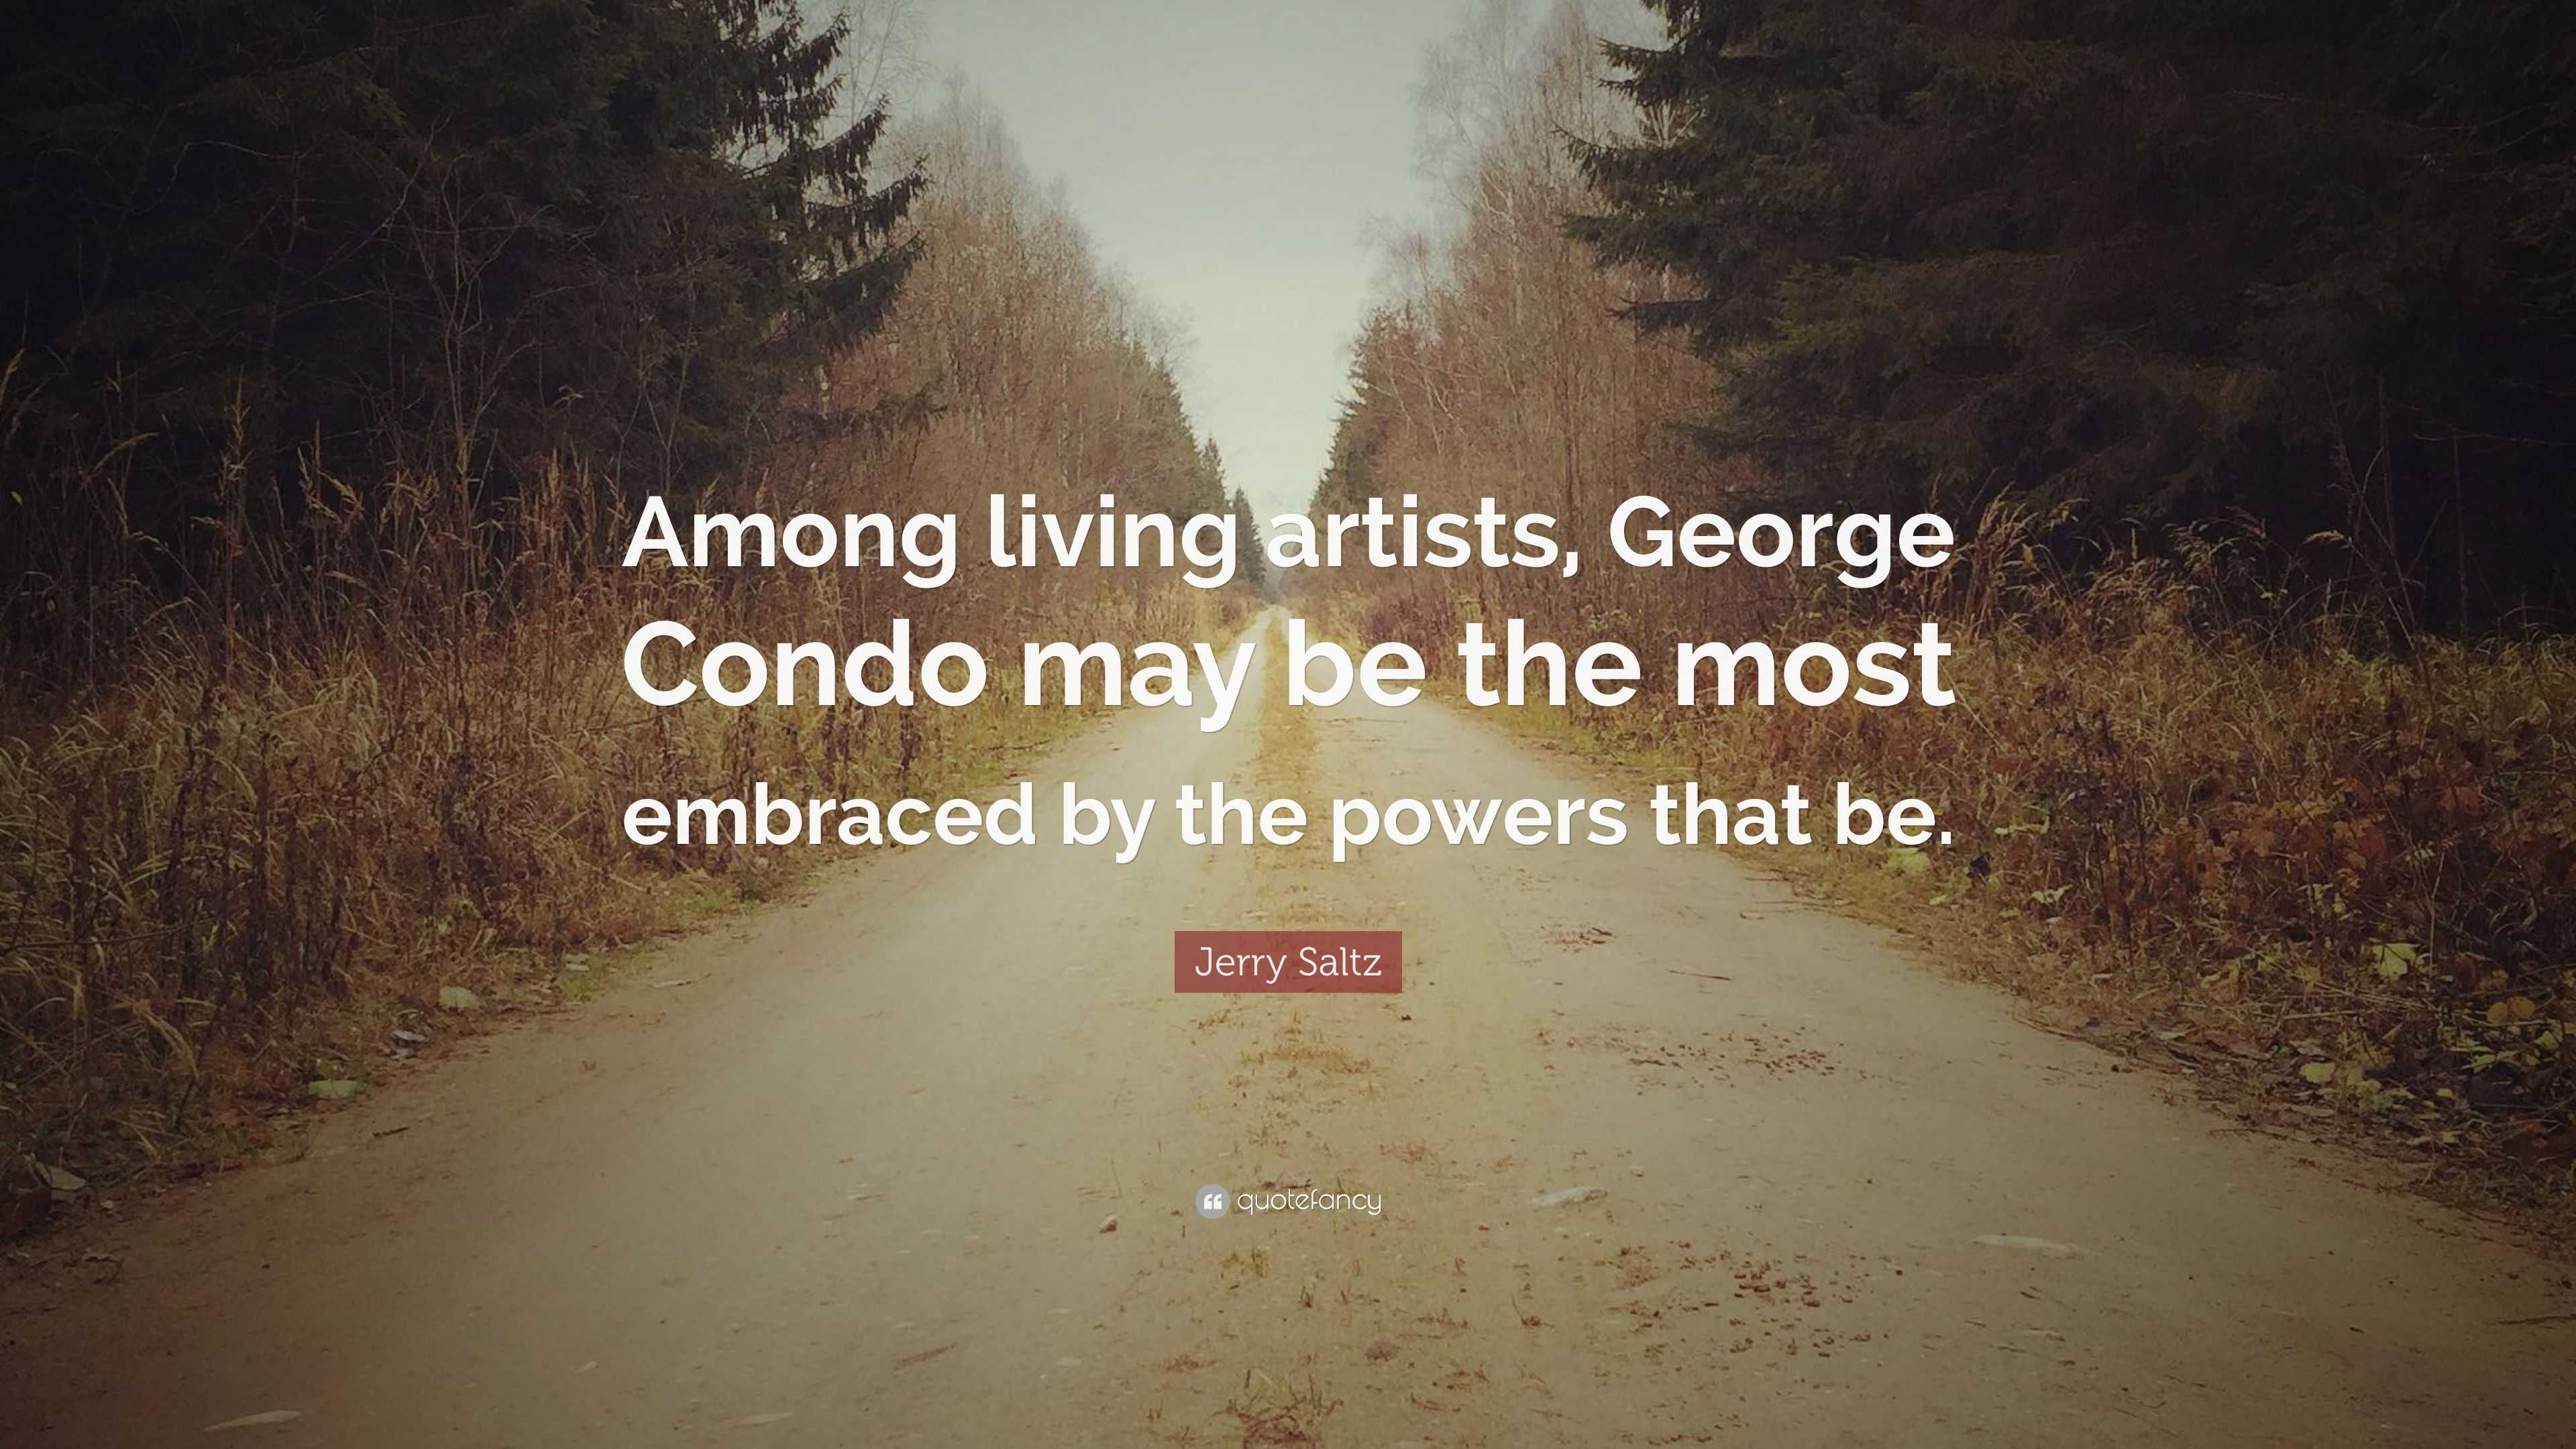 Jerry Saltz Quote: “Among living artists, George Condo may be the most